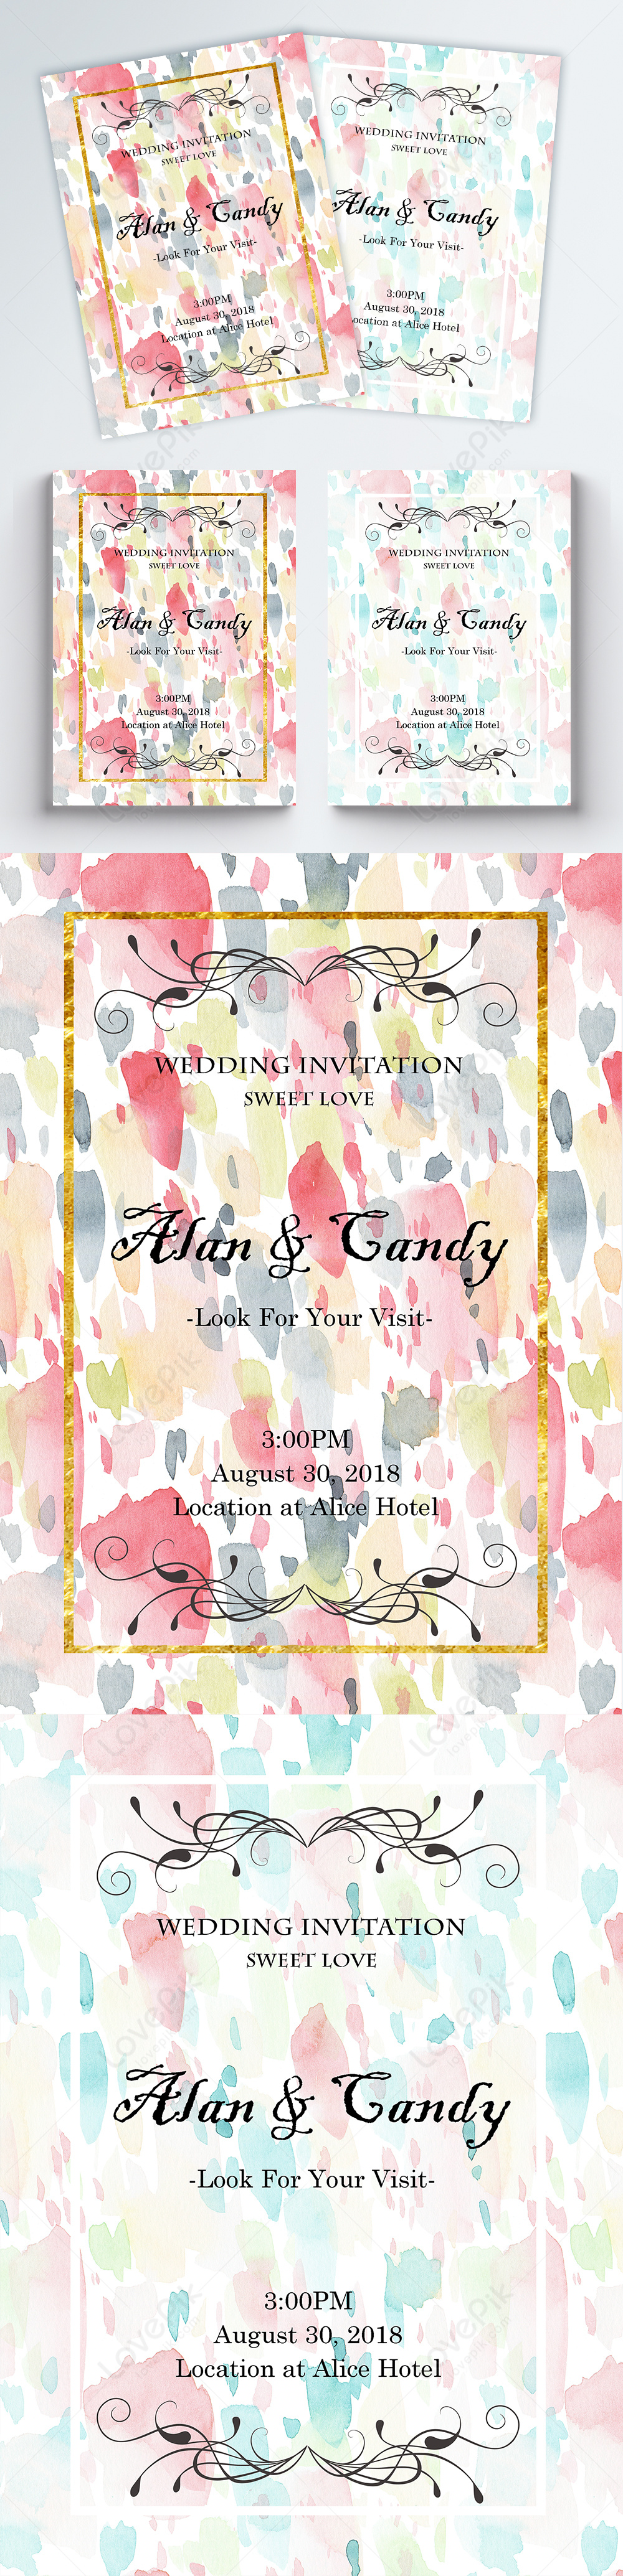 Watercolor brushes flowers wedding invitations template image_picture ...